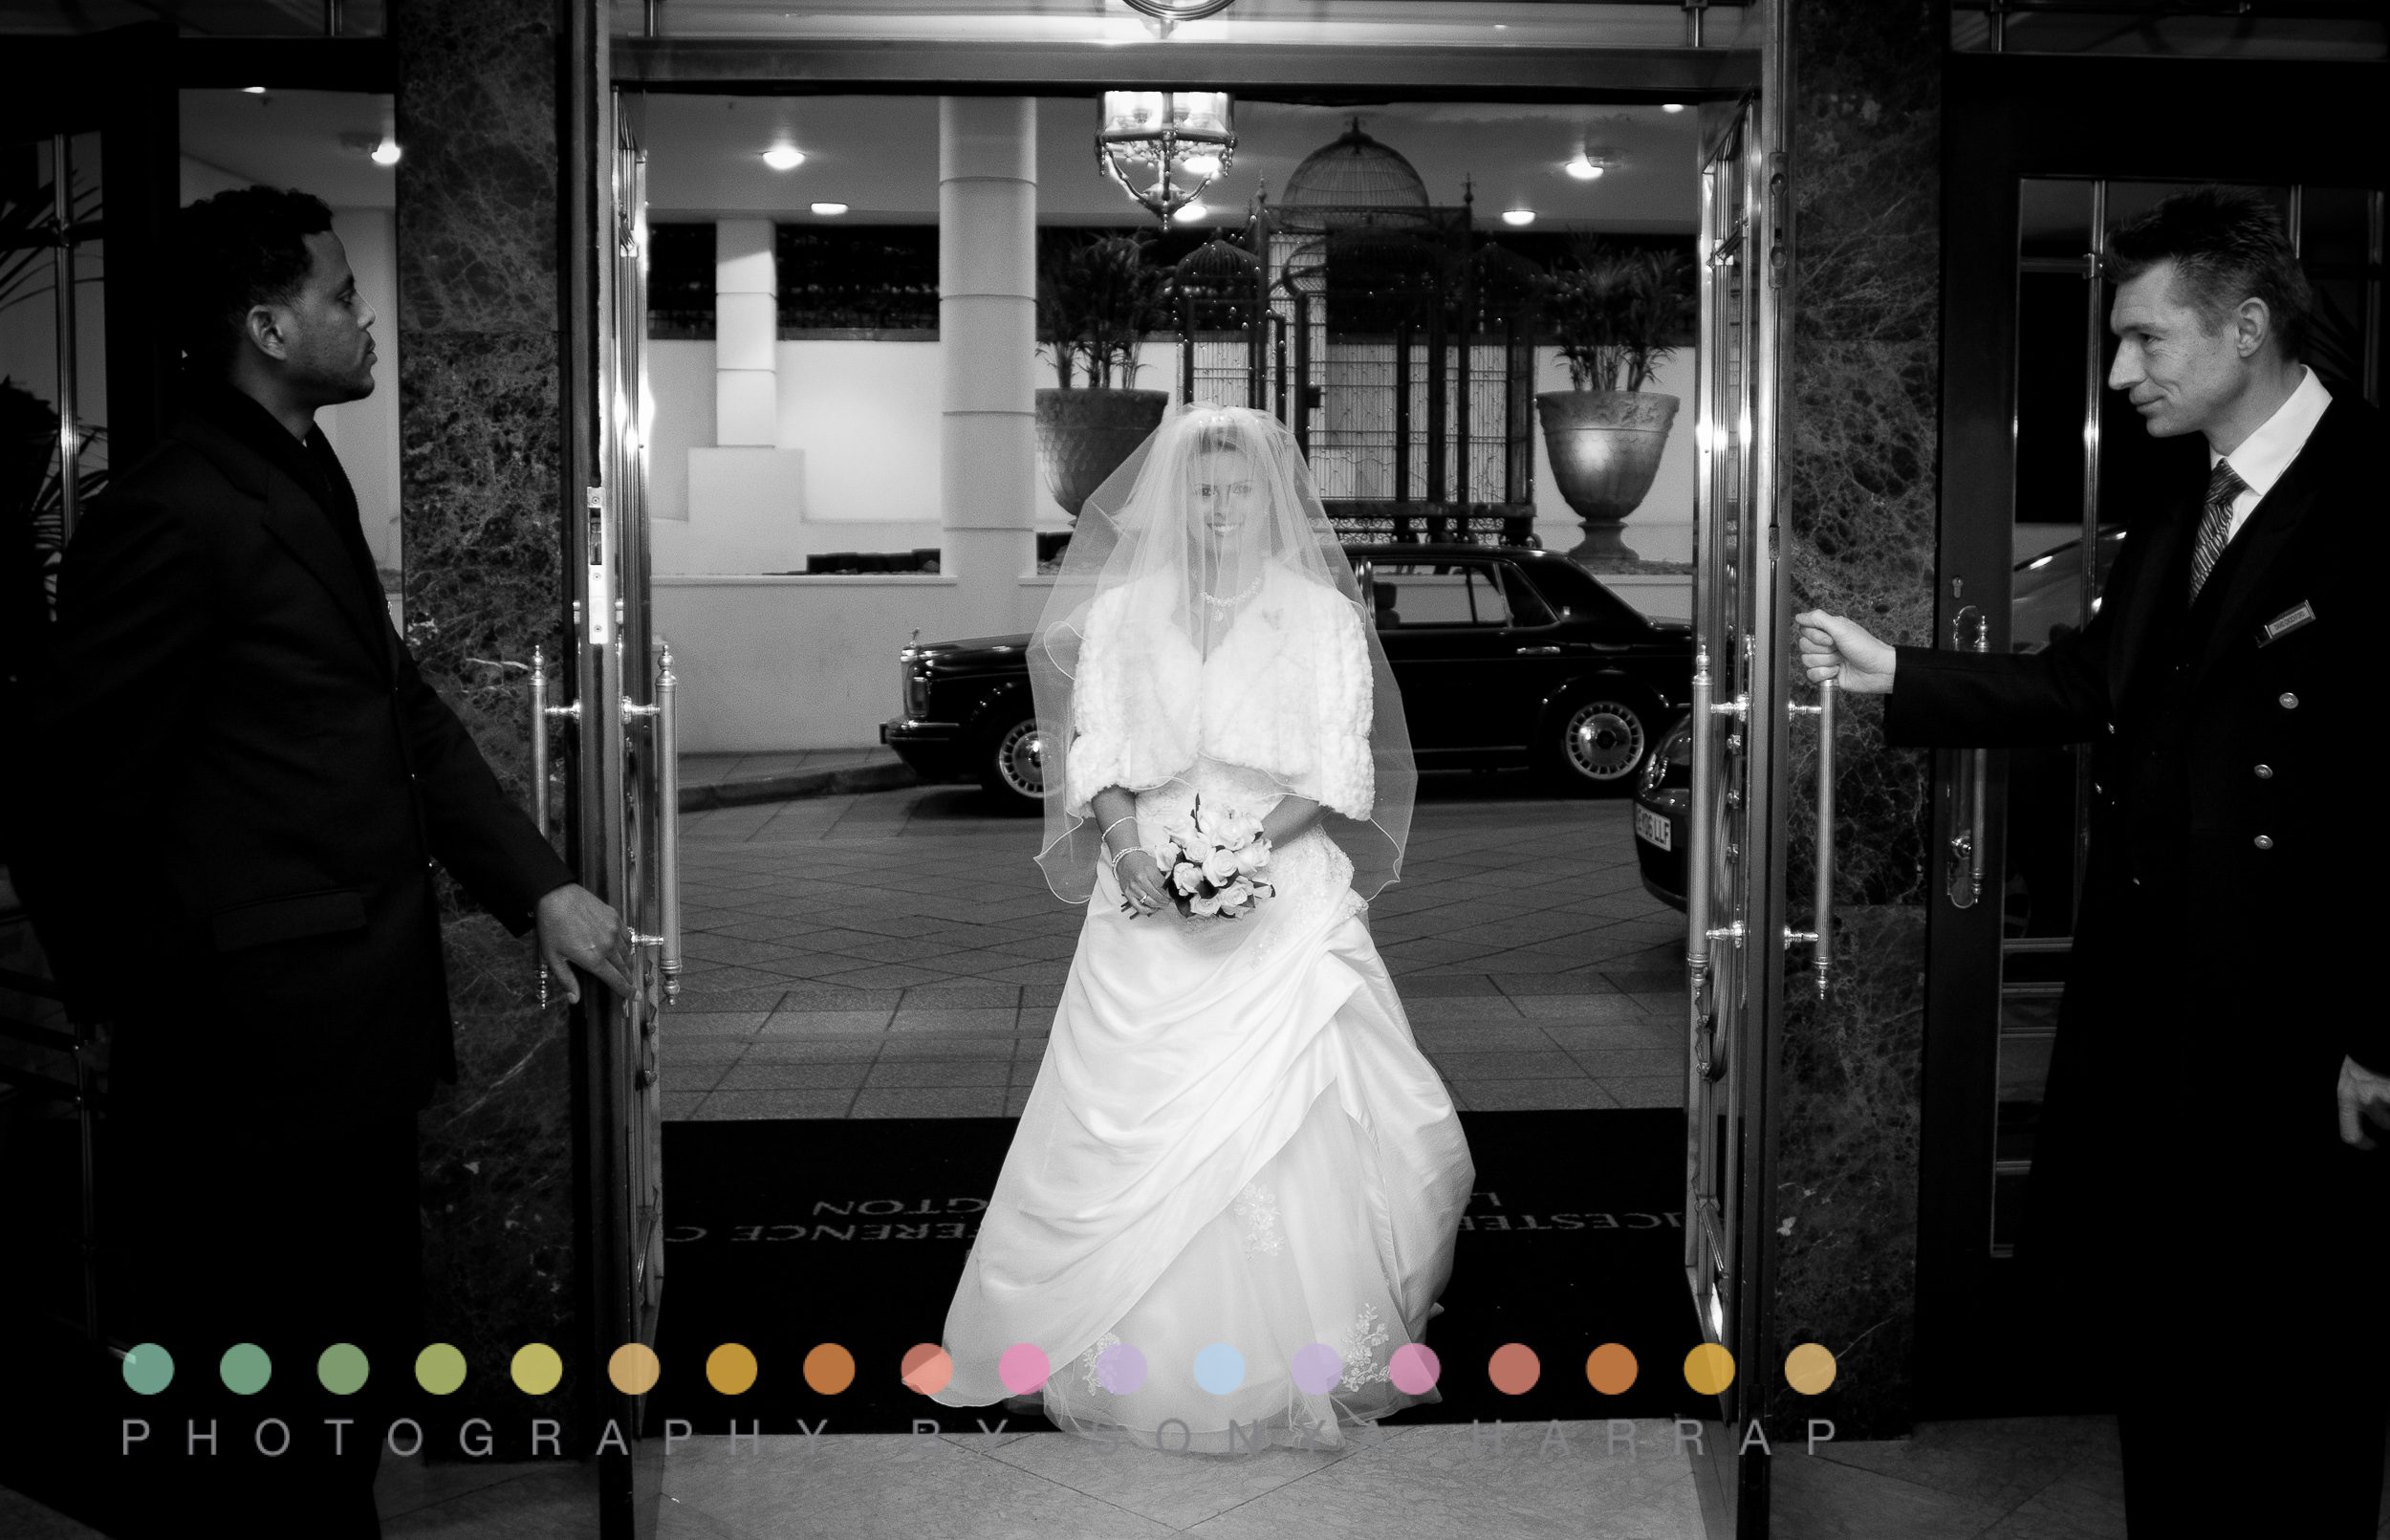 doors open at reception walking to the ceremony bright conservatory western bride a in central London millennium Gloucester hotel wedding